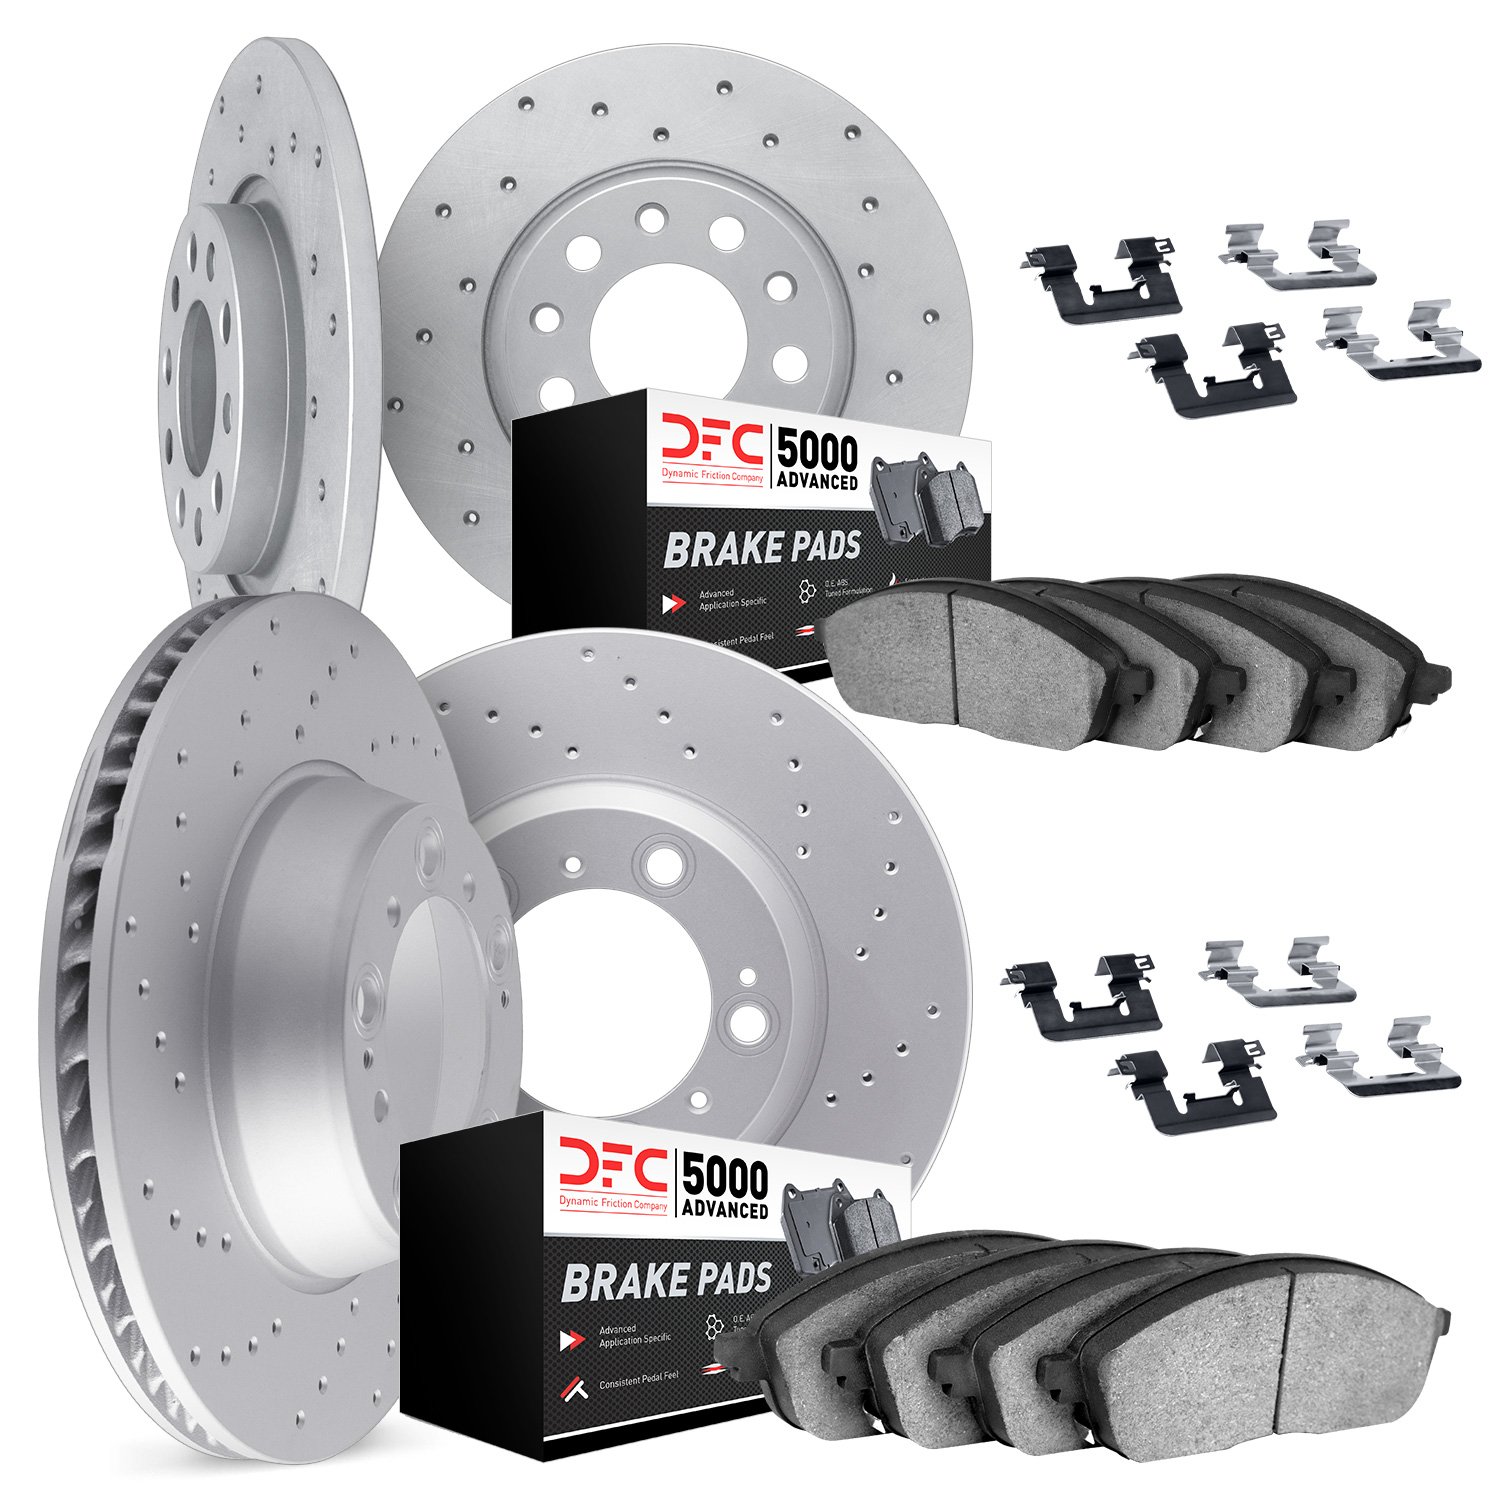 2714-54027 Geoperformance Drilled Brake Rotors with Active Performance Pads Kit & Hardware, 2012-2018 Ford/Lincoln/Mercury/Mazda